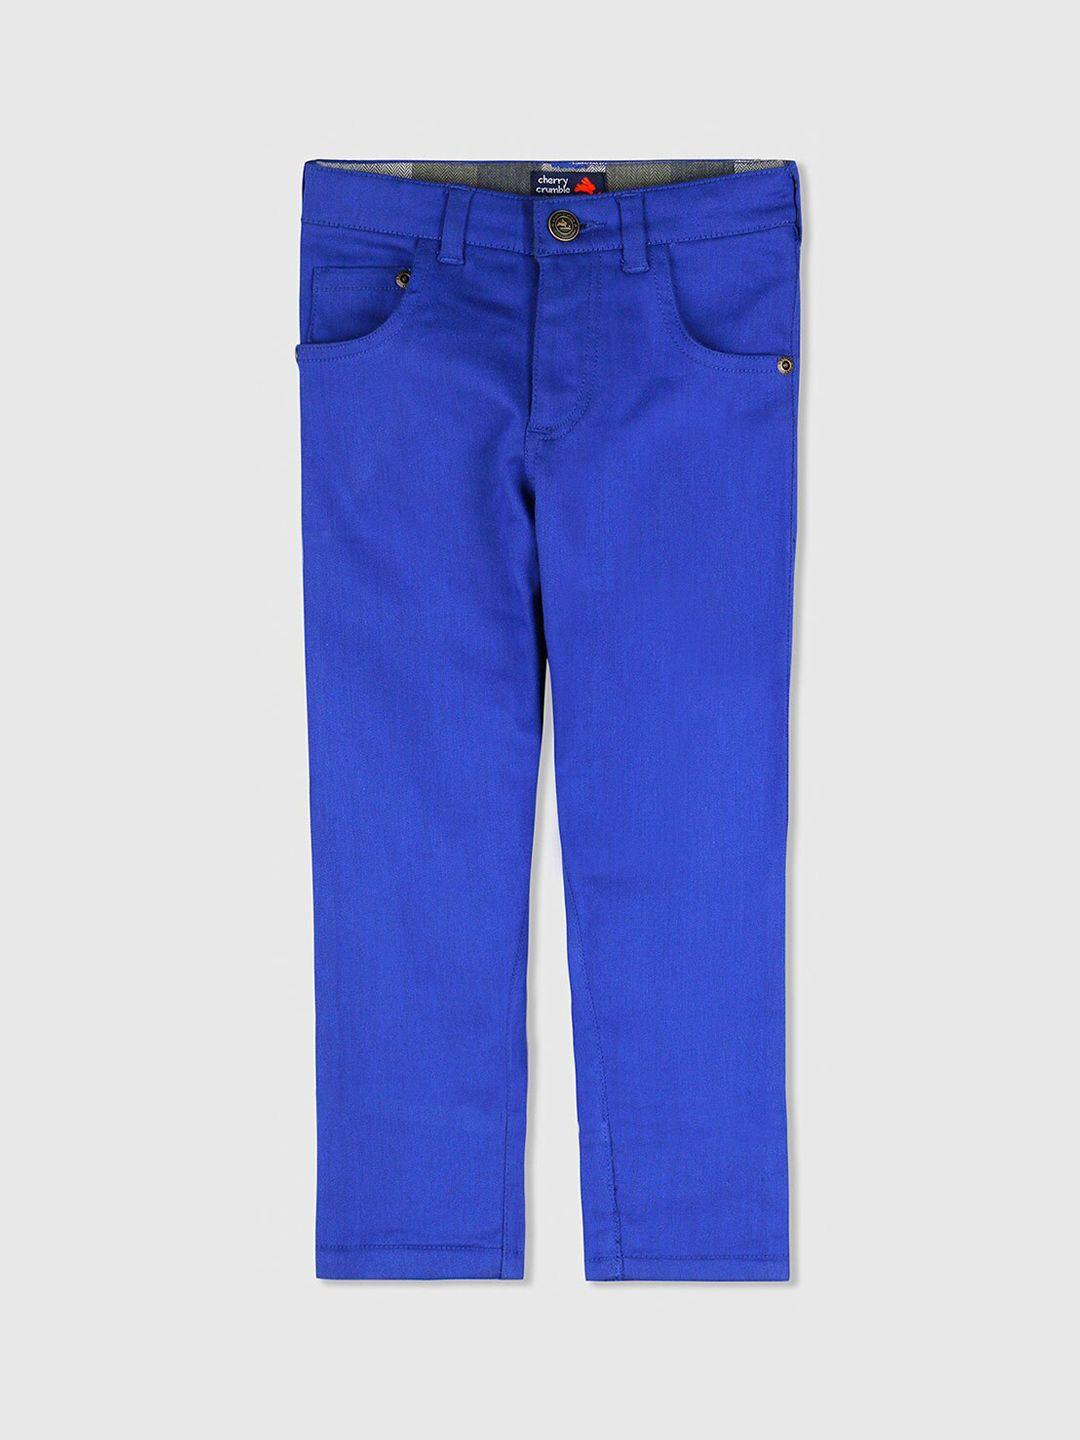 cherry crumble boys navy blue regular fit solid chinos